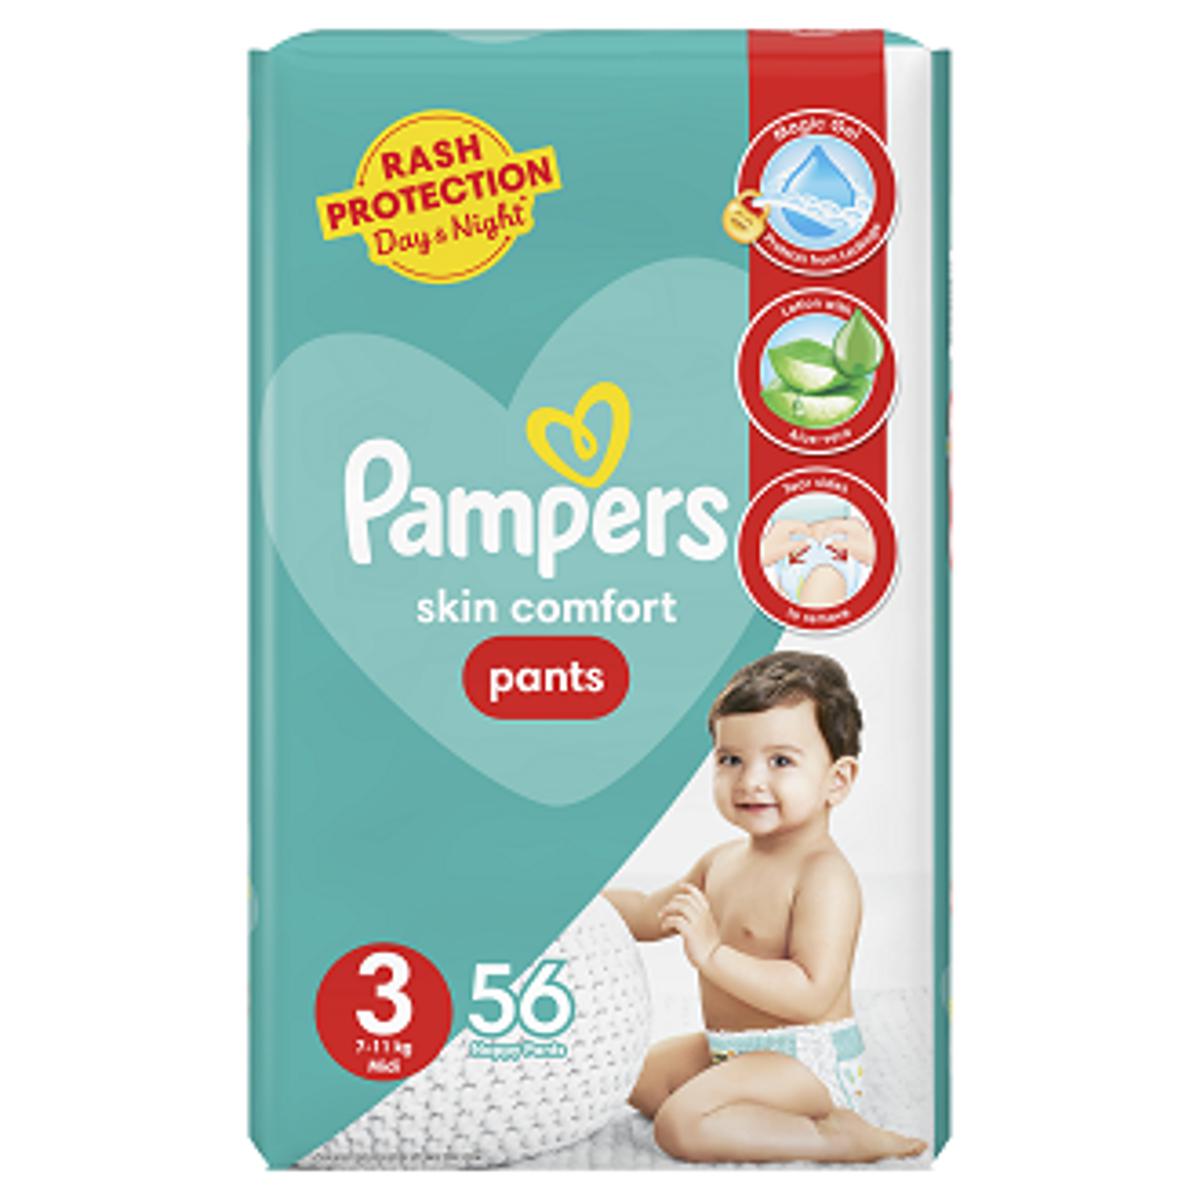 Pampers Pants Baby Diapers (Size 3 Medium 56 Pcs)